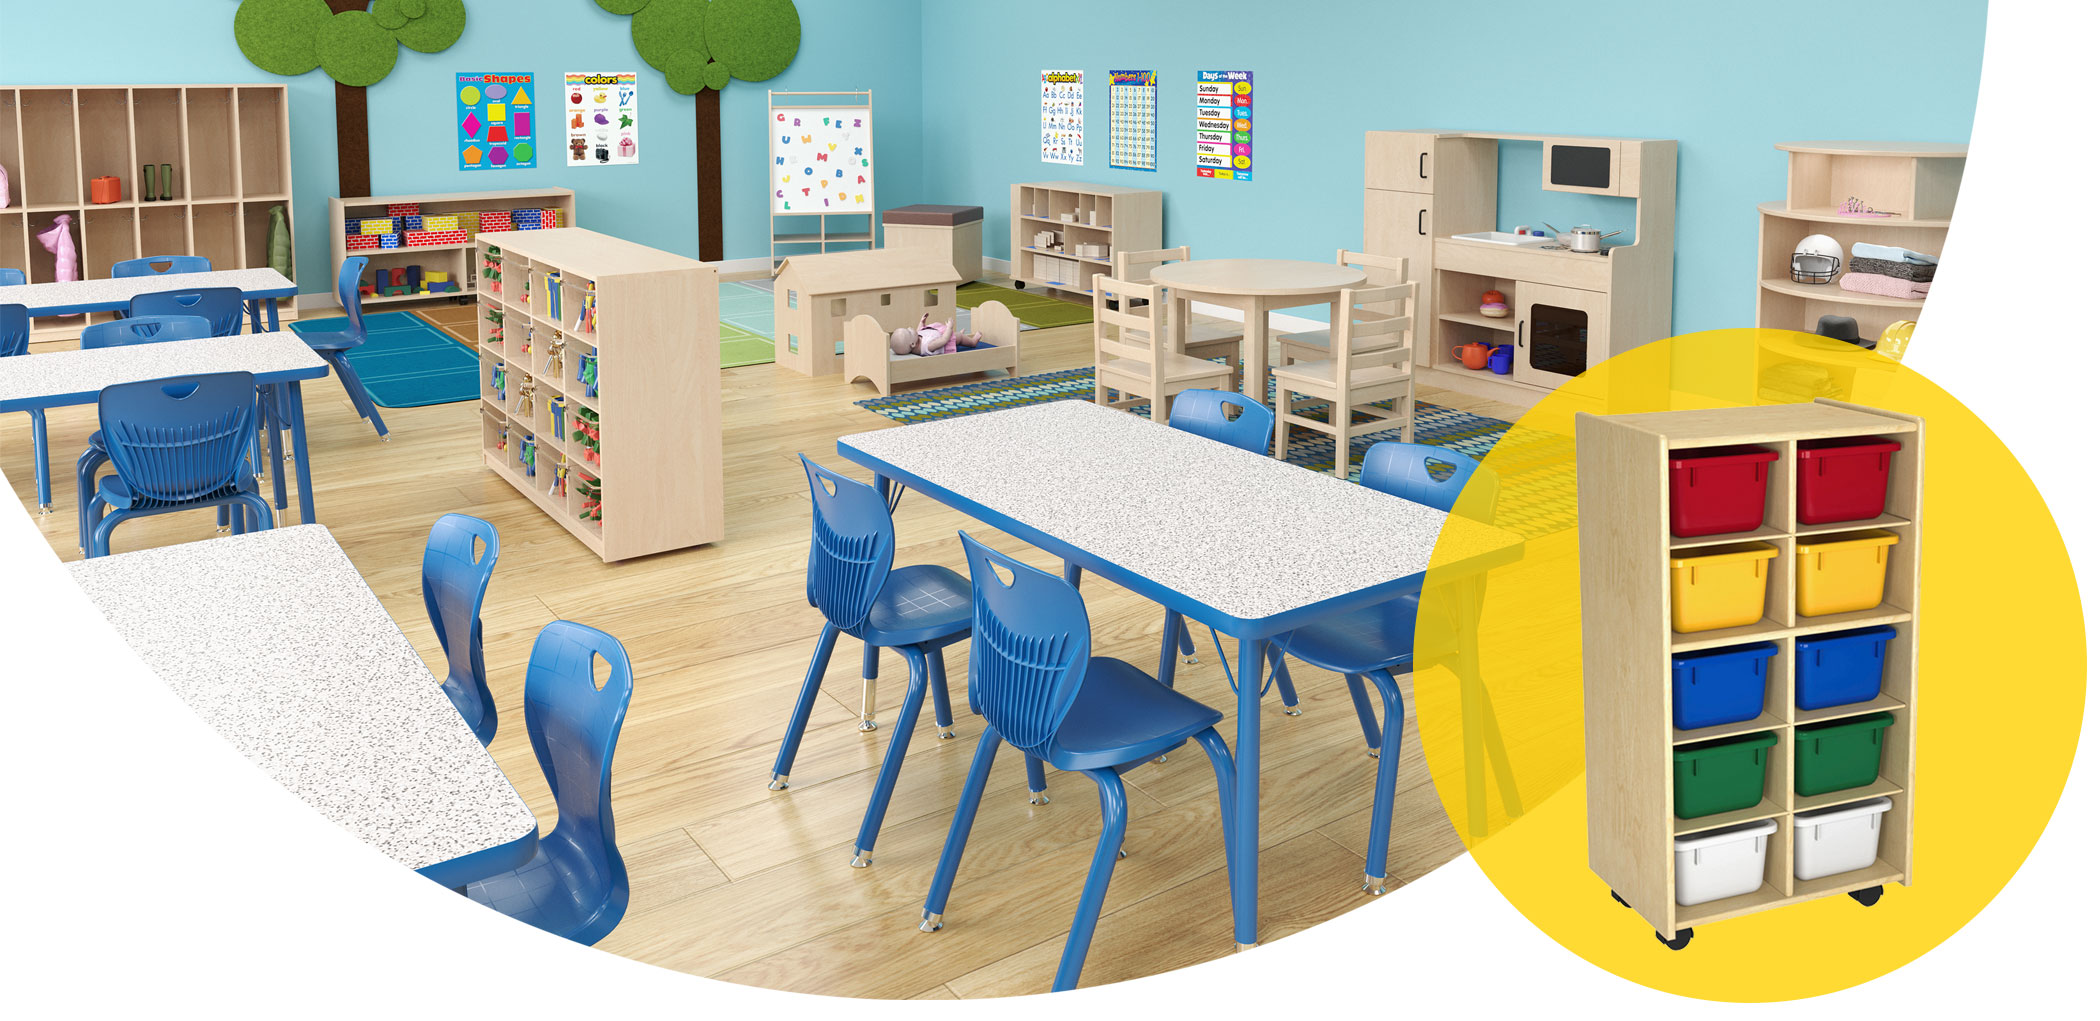 Early childhood classroom with a yellow bubble overlaid the right with multicolored drawers inside